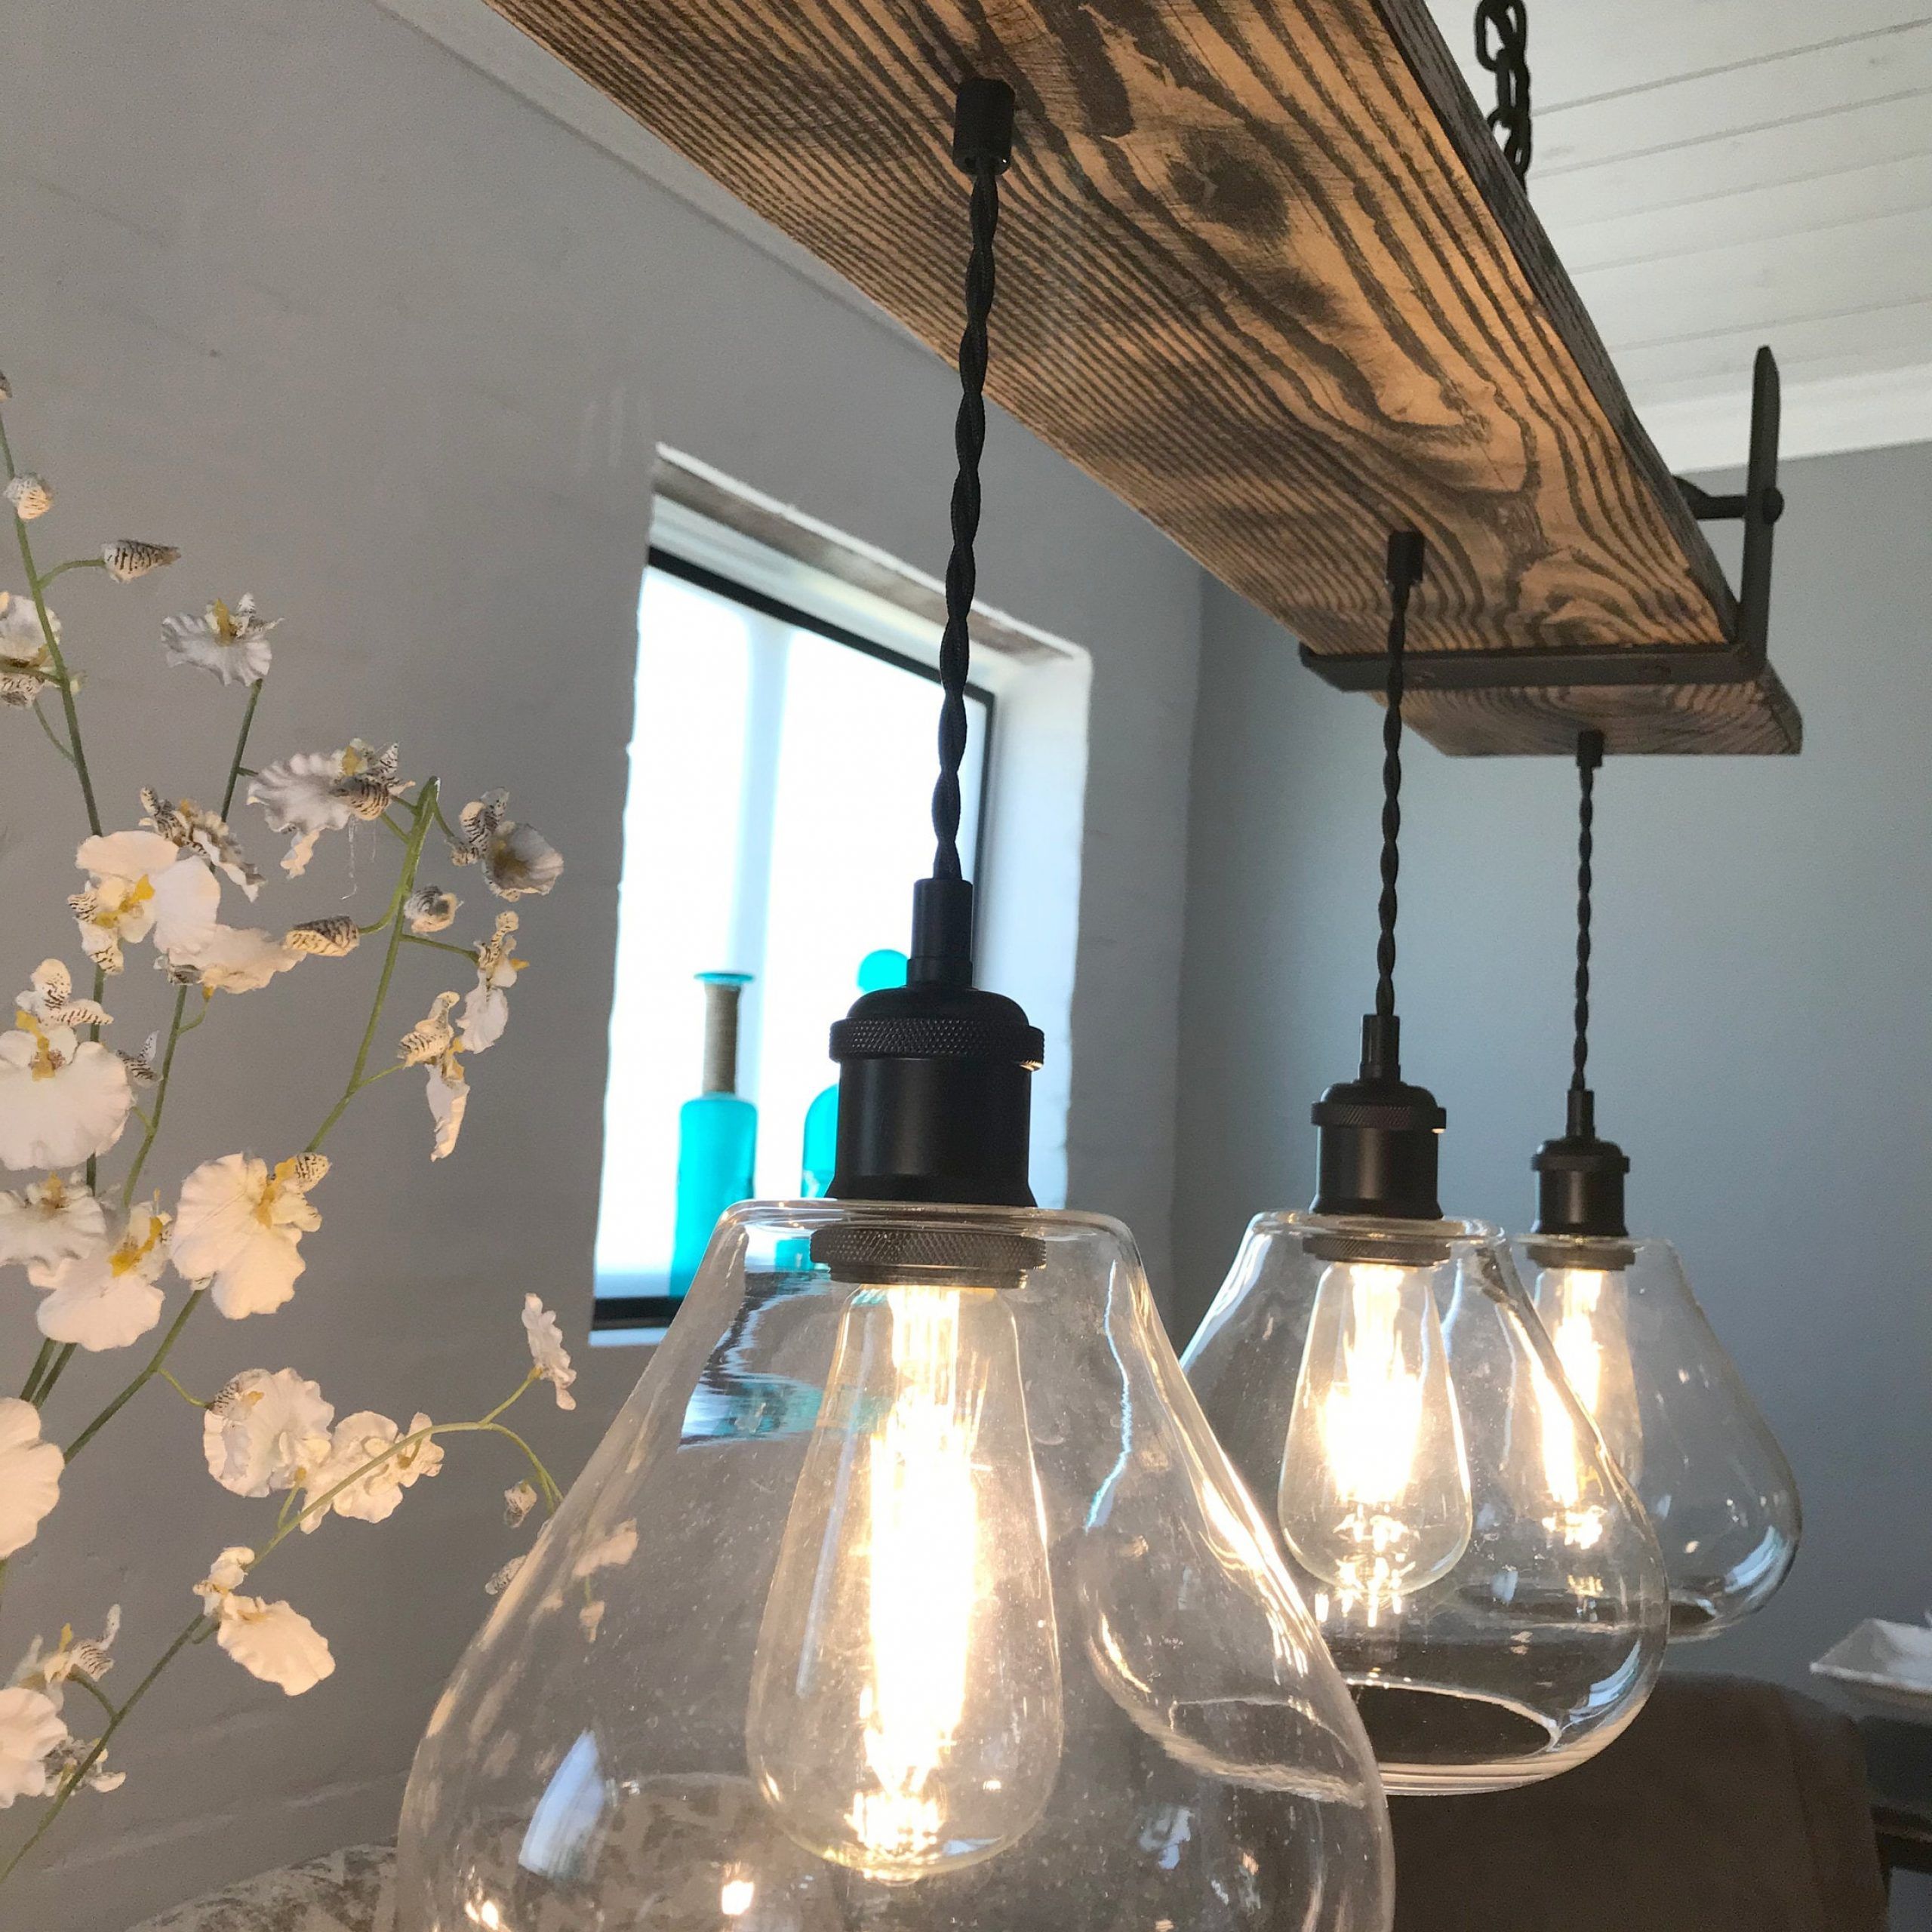 Aged Oak Wood 4 Hanging Light Chandelier With Barnwood Beam – Etsy Intended For Most Popular Distressed Oak Lantern Chandeliers (View 12 of 15)